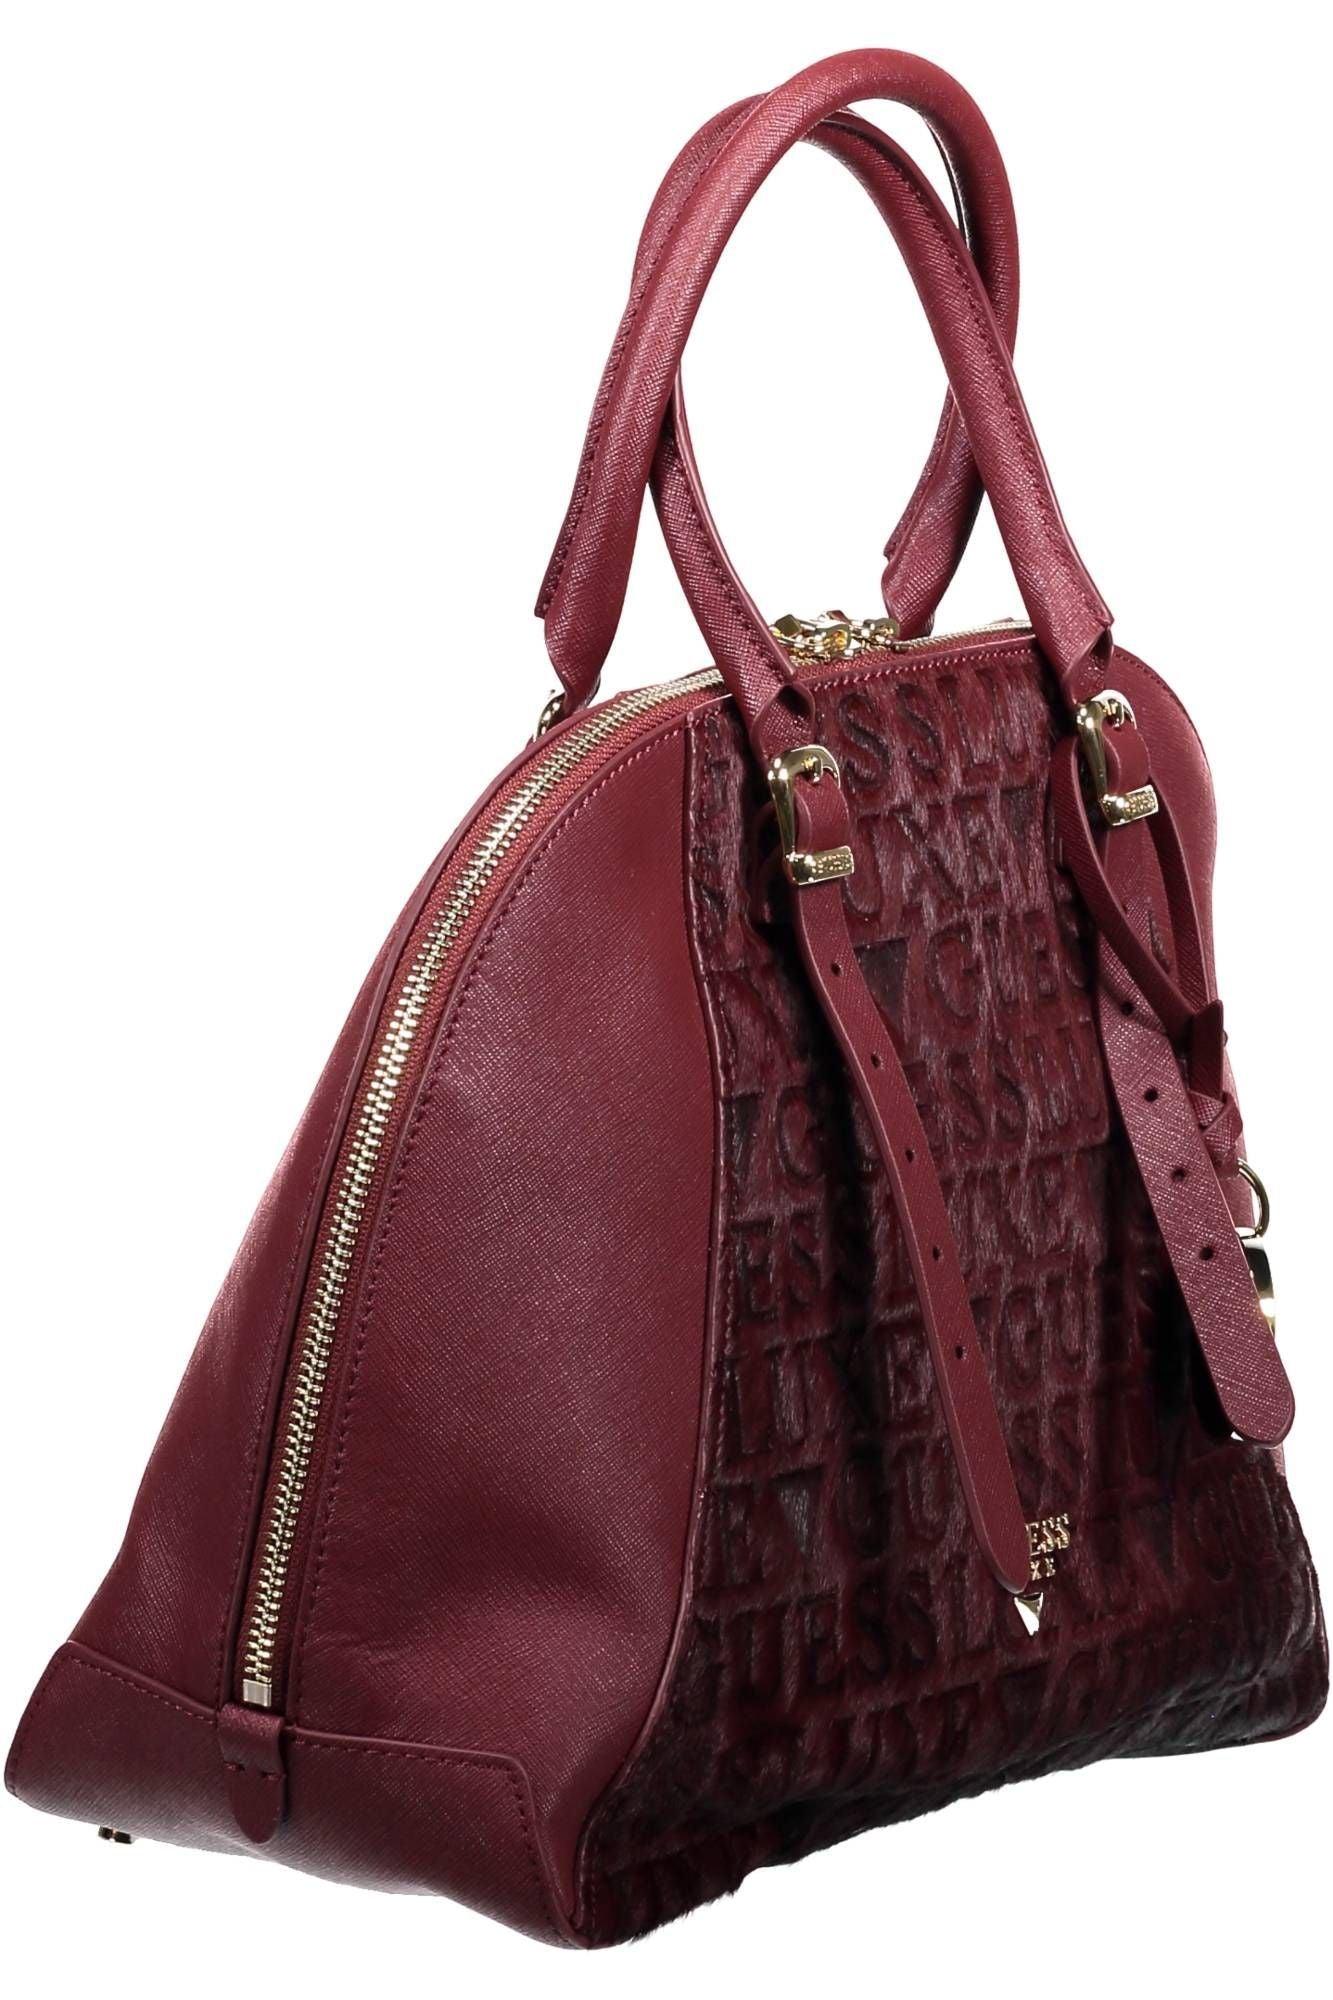 Guess Leather Handbag in Red | Lyst